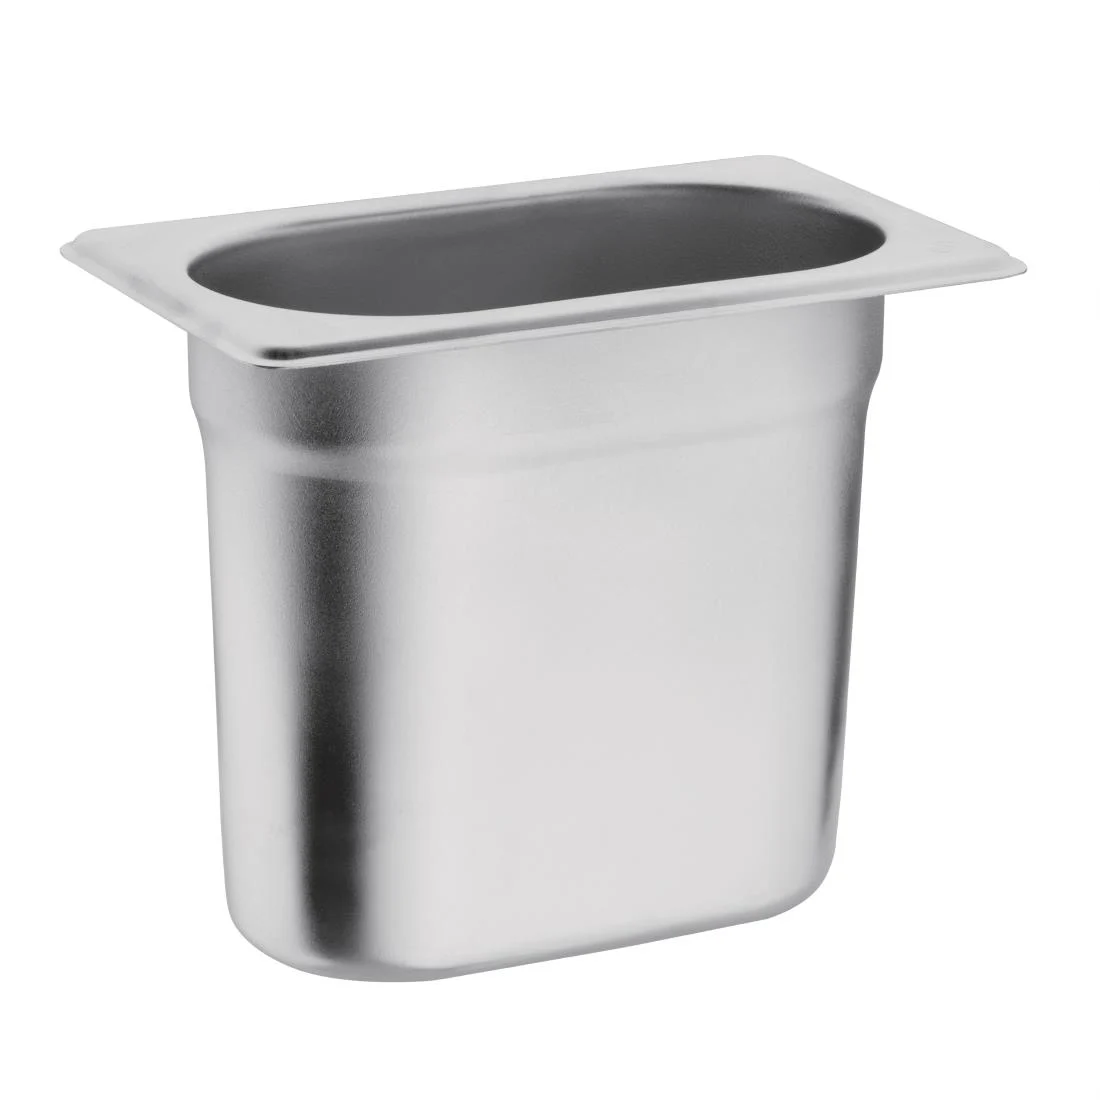 1/9th Size Stainless Gastronorm Pan - 150mm deep